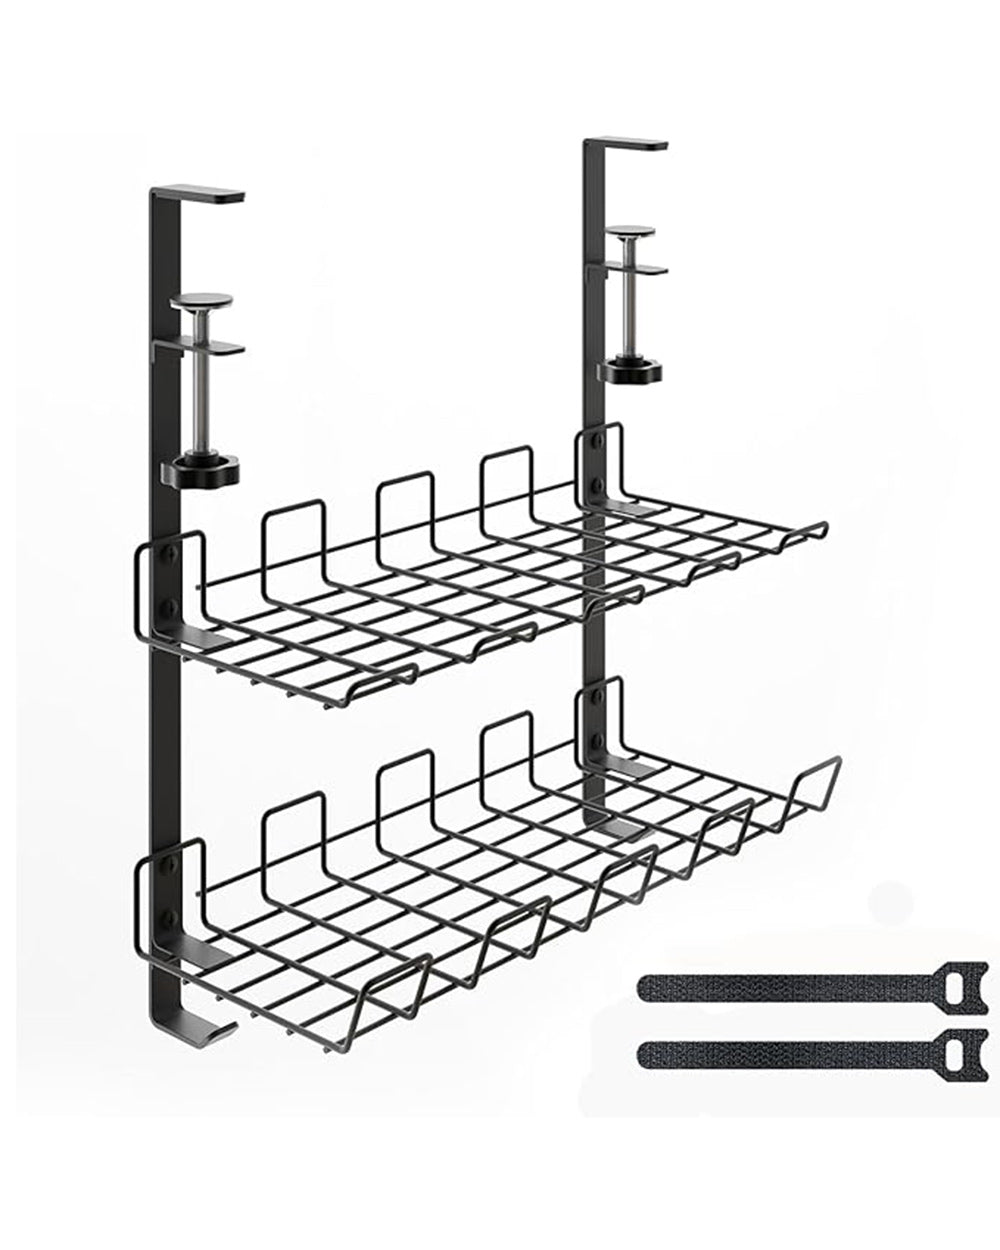 2 Tier Under Desk Cable Management Tray Home Office Black